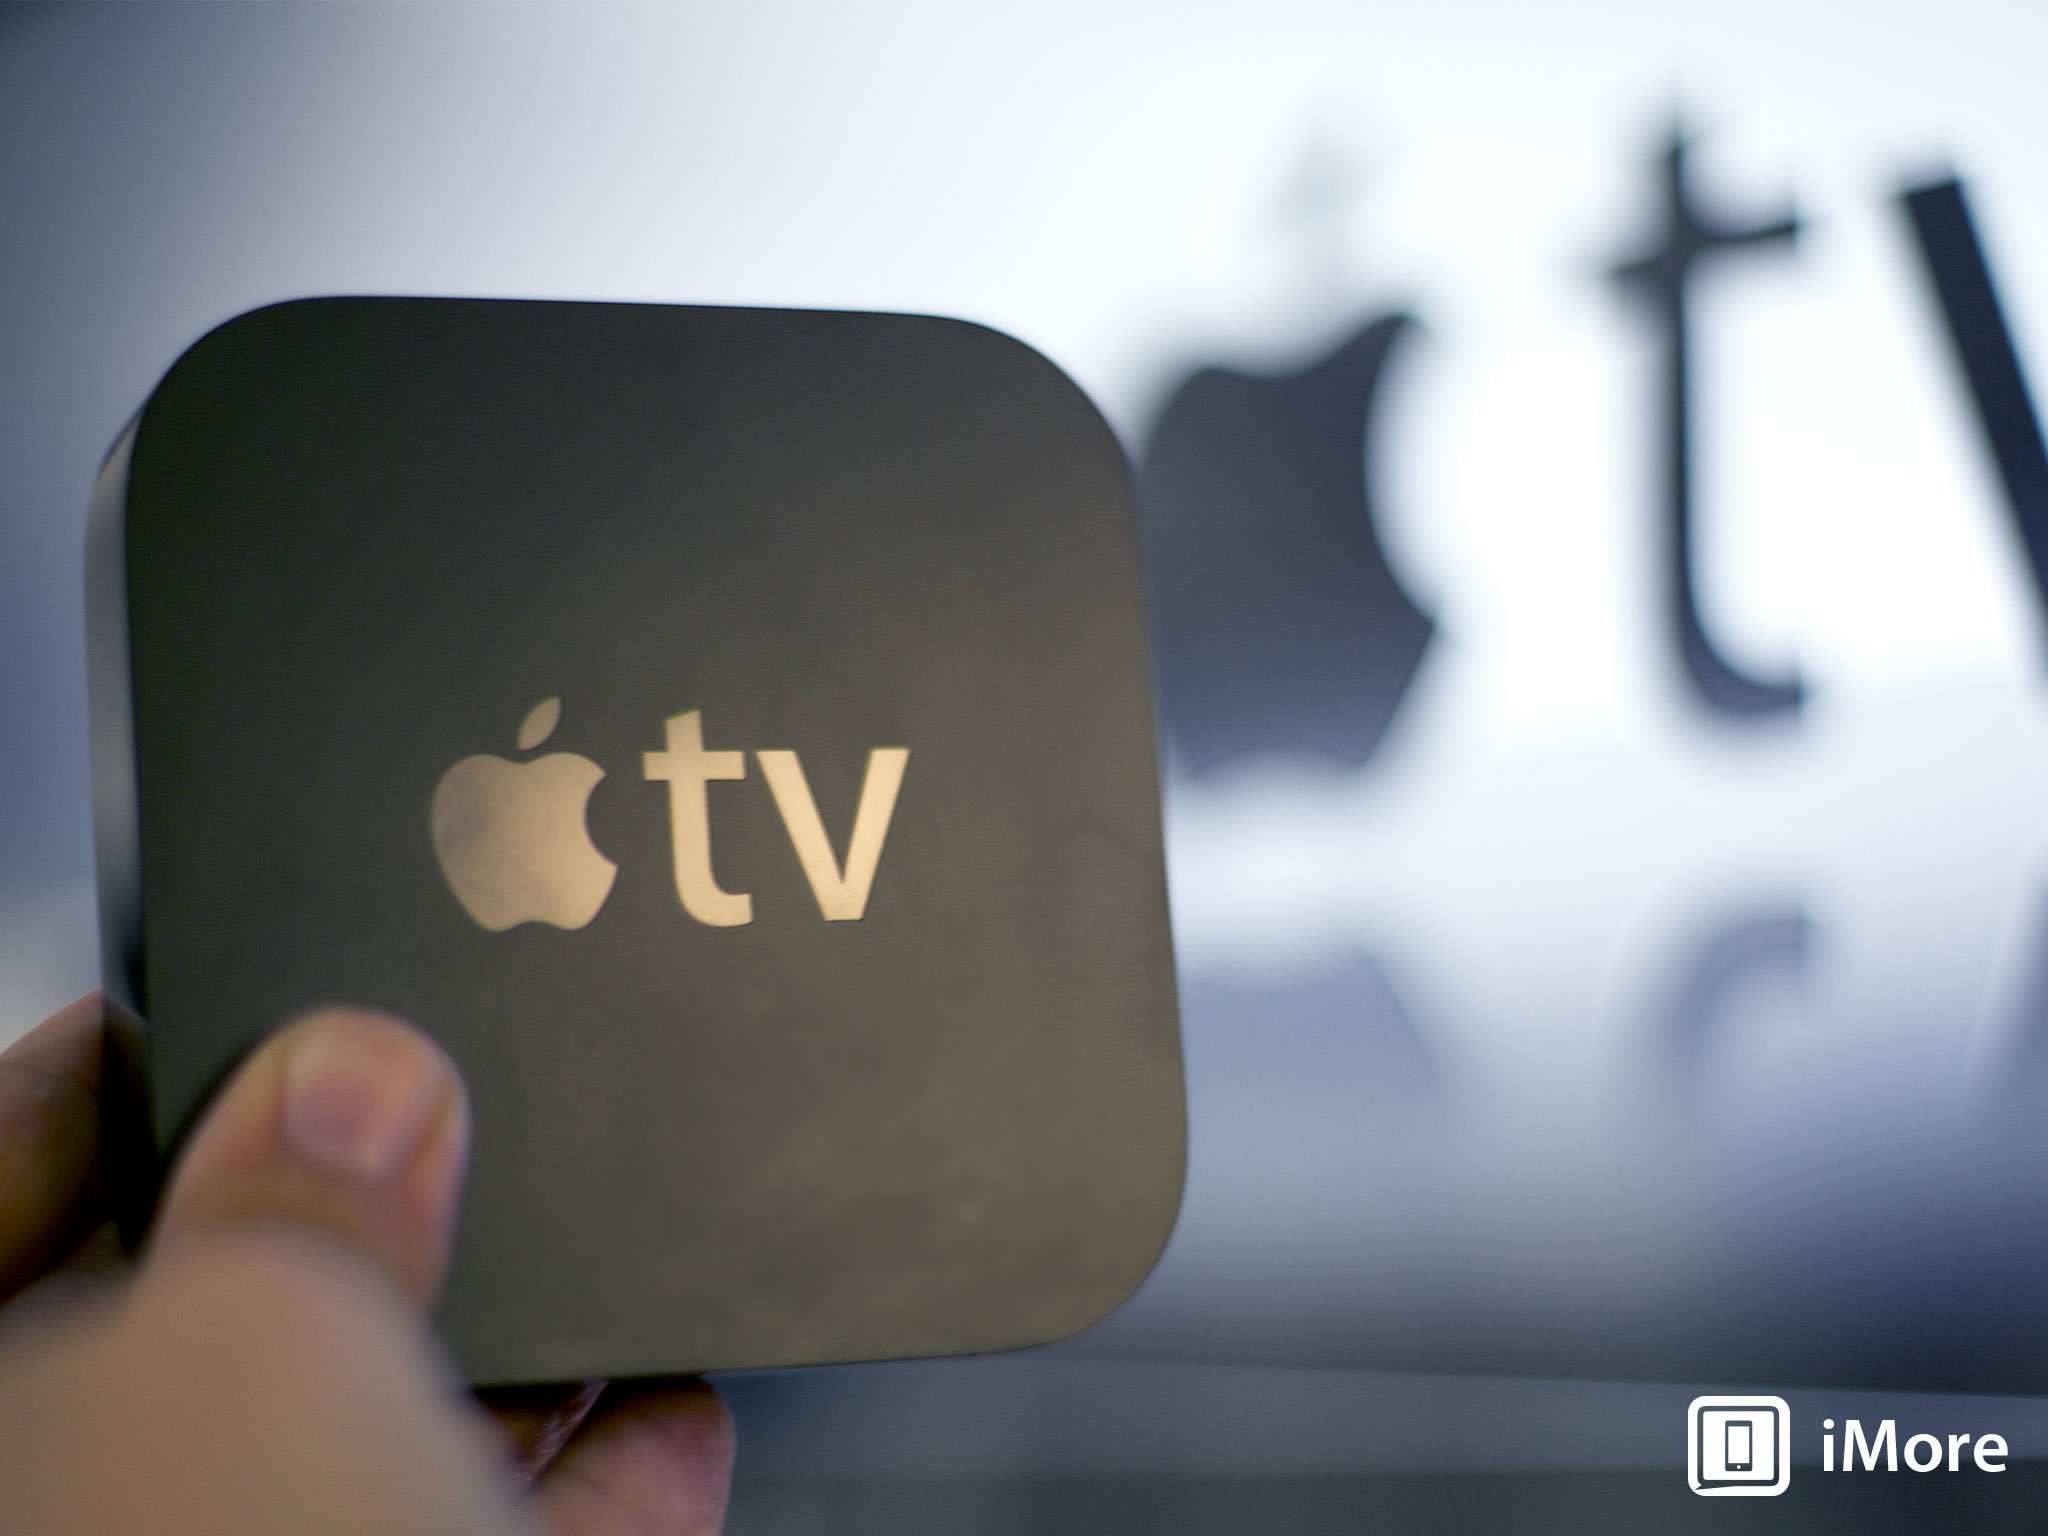 What could possibly cause a half-a-year delay for a new Apple TV?